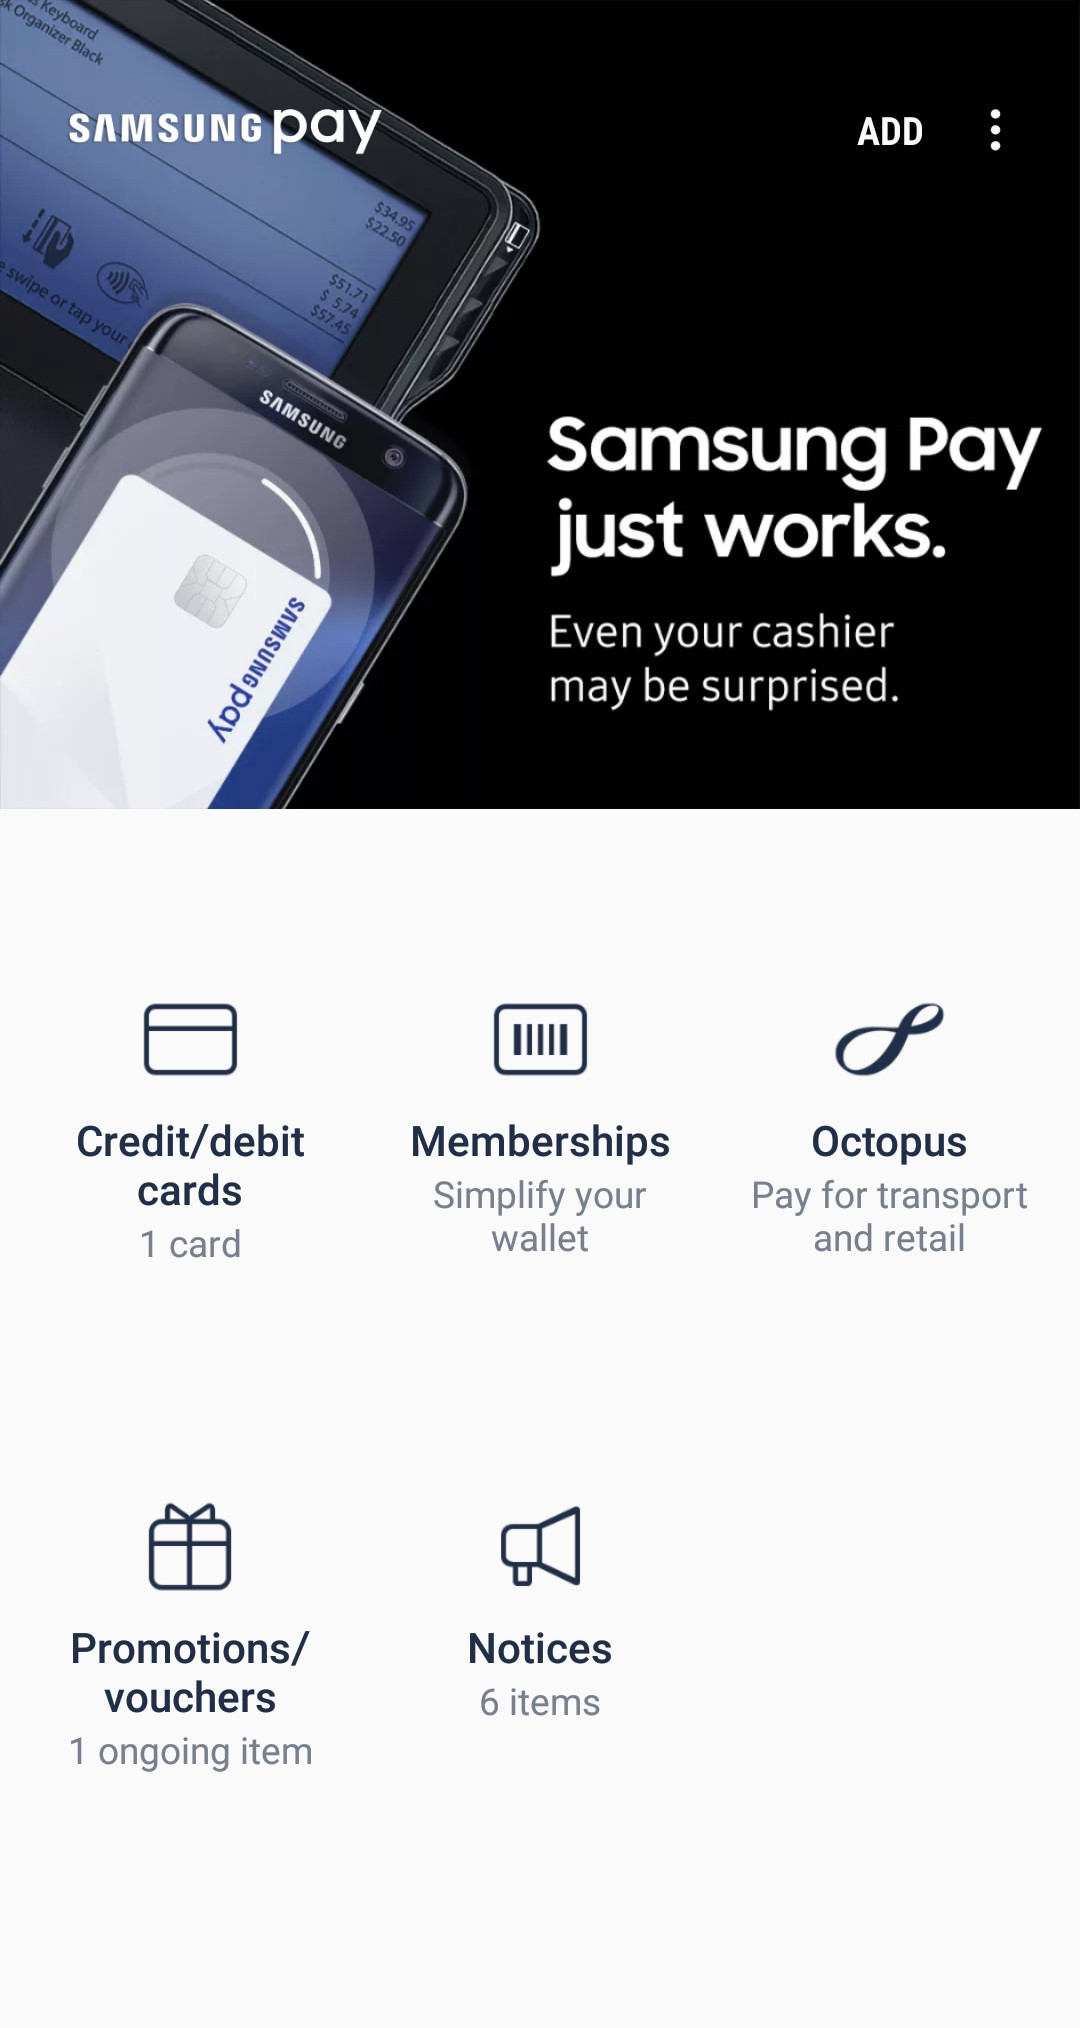 Samsung Pay - How to use - Add HSBC Credit Card to Samsung Pay